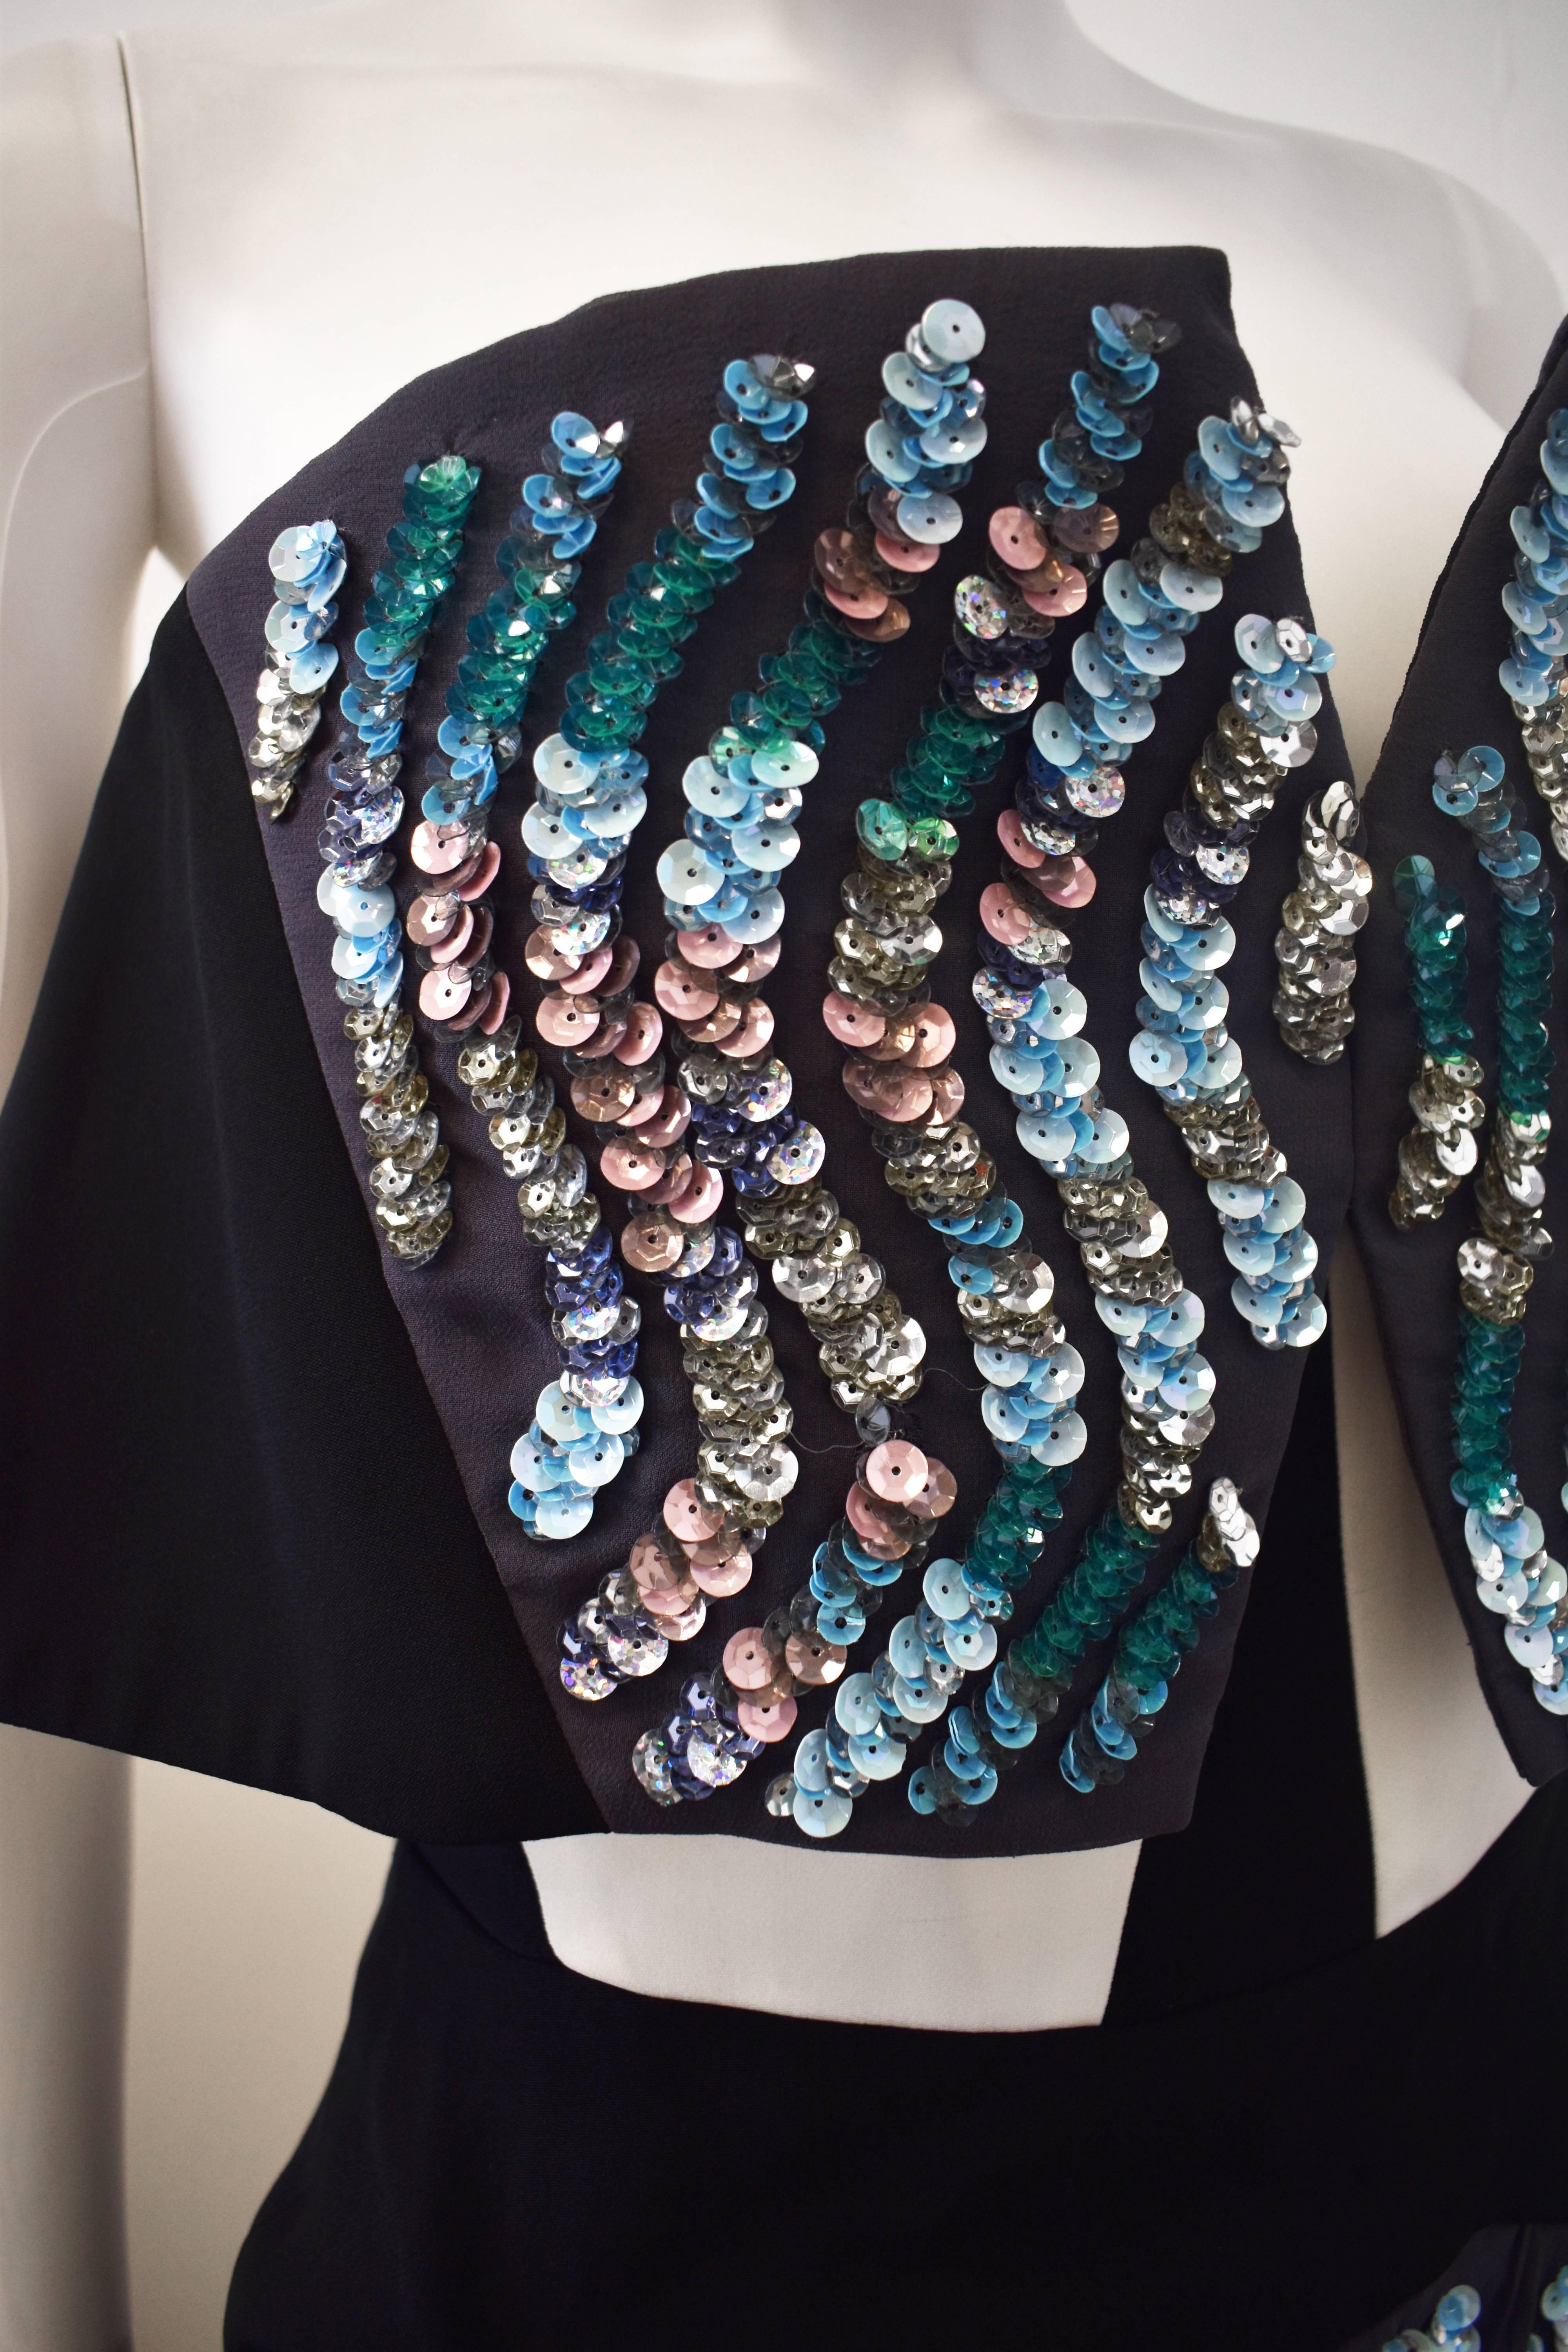 Peter Pilotto Strapless Embellished Sequin Cocktail ‘Wave’ Dress A/W 13 1